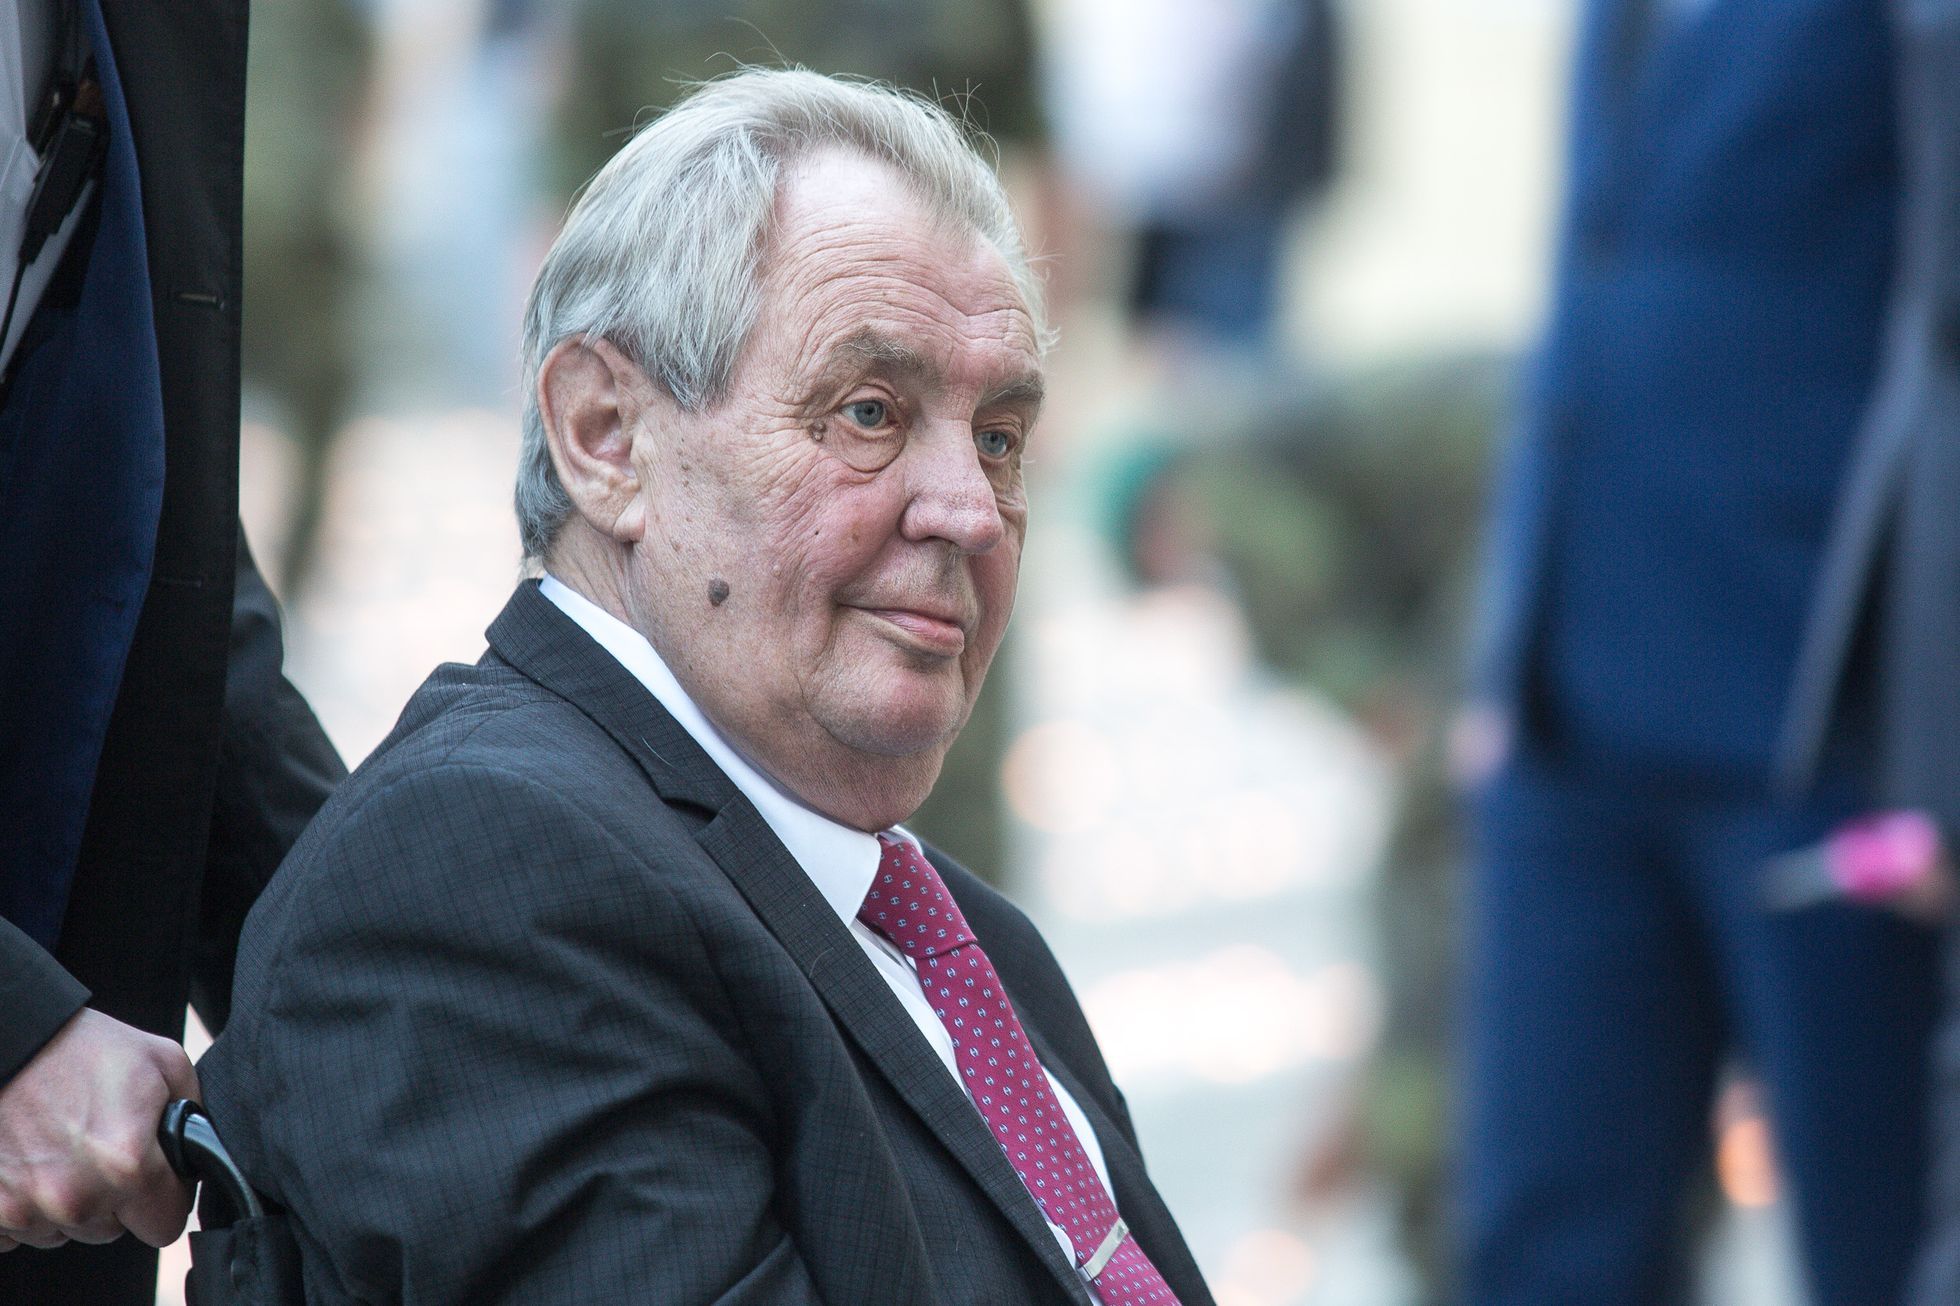 Impaired consciousness and cirrhosis of the liver, according to a new hospital report on Zeman’s condition